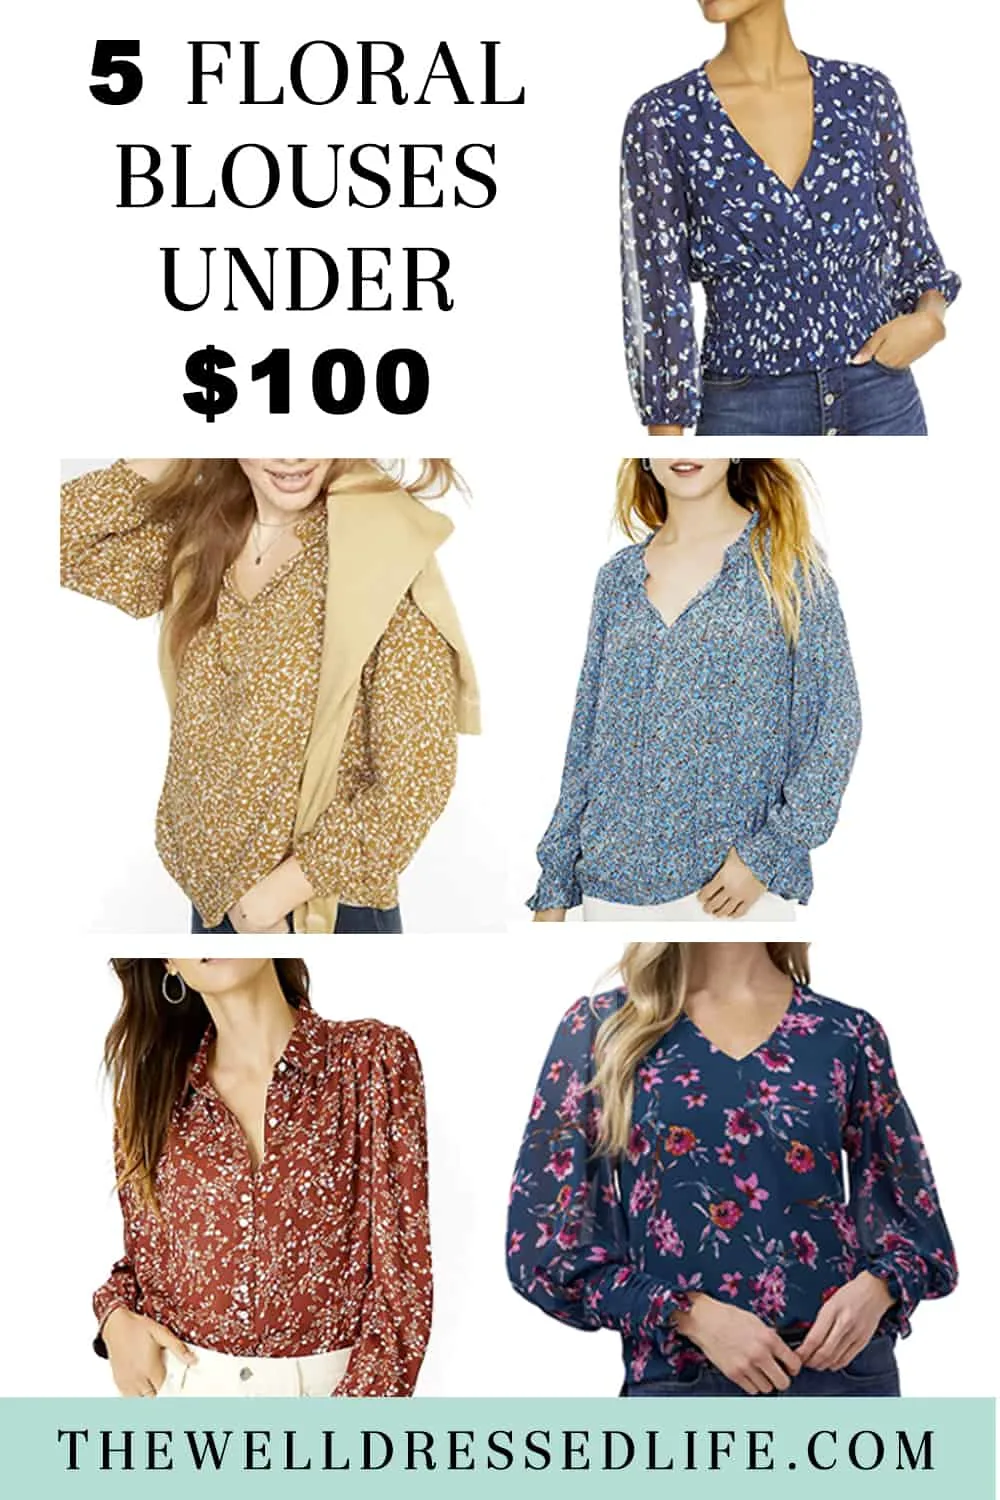 5 Fall Floral Blouses Under $100